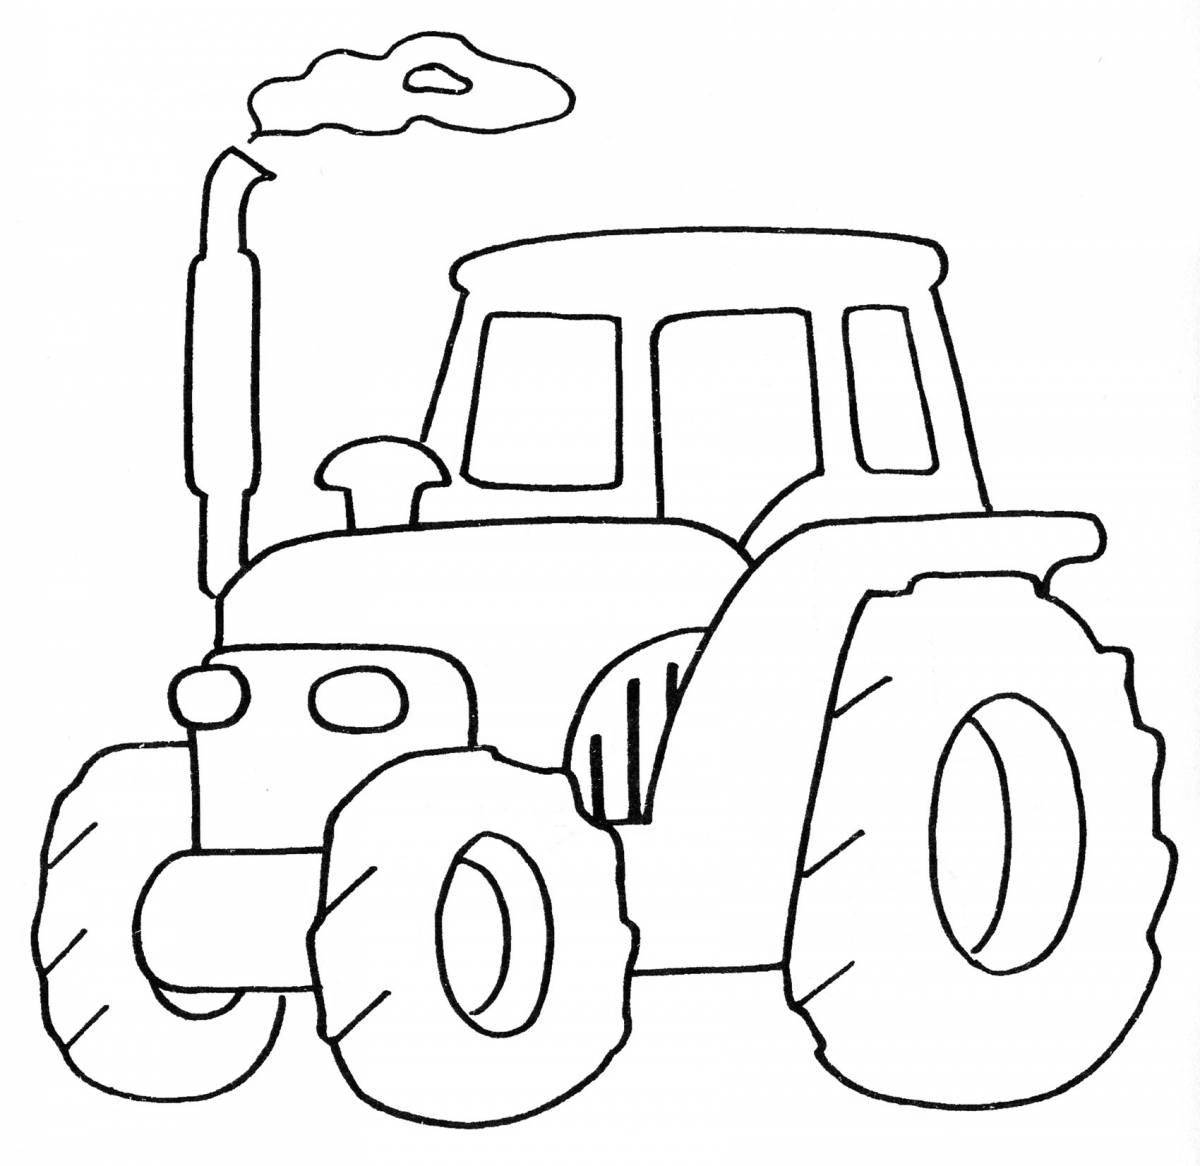 Tractors for children 3 4 years old #7